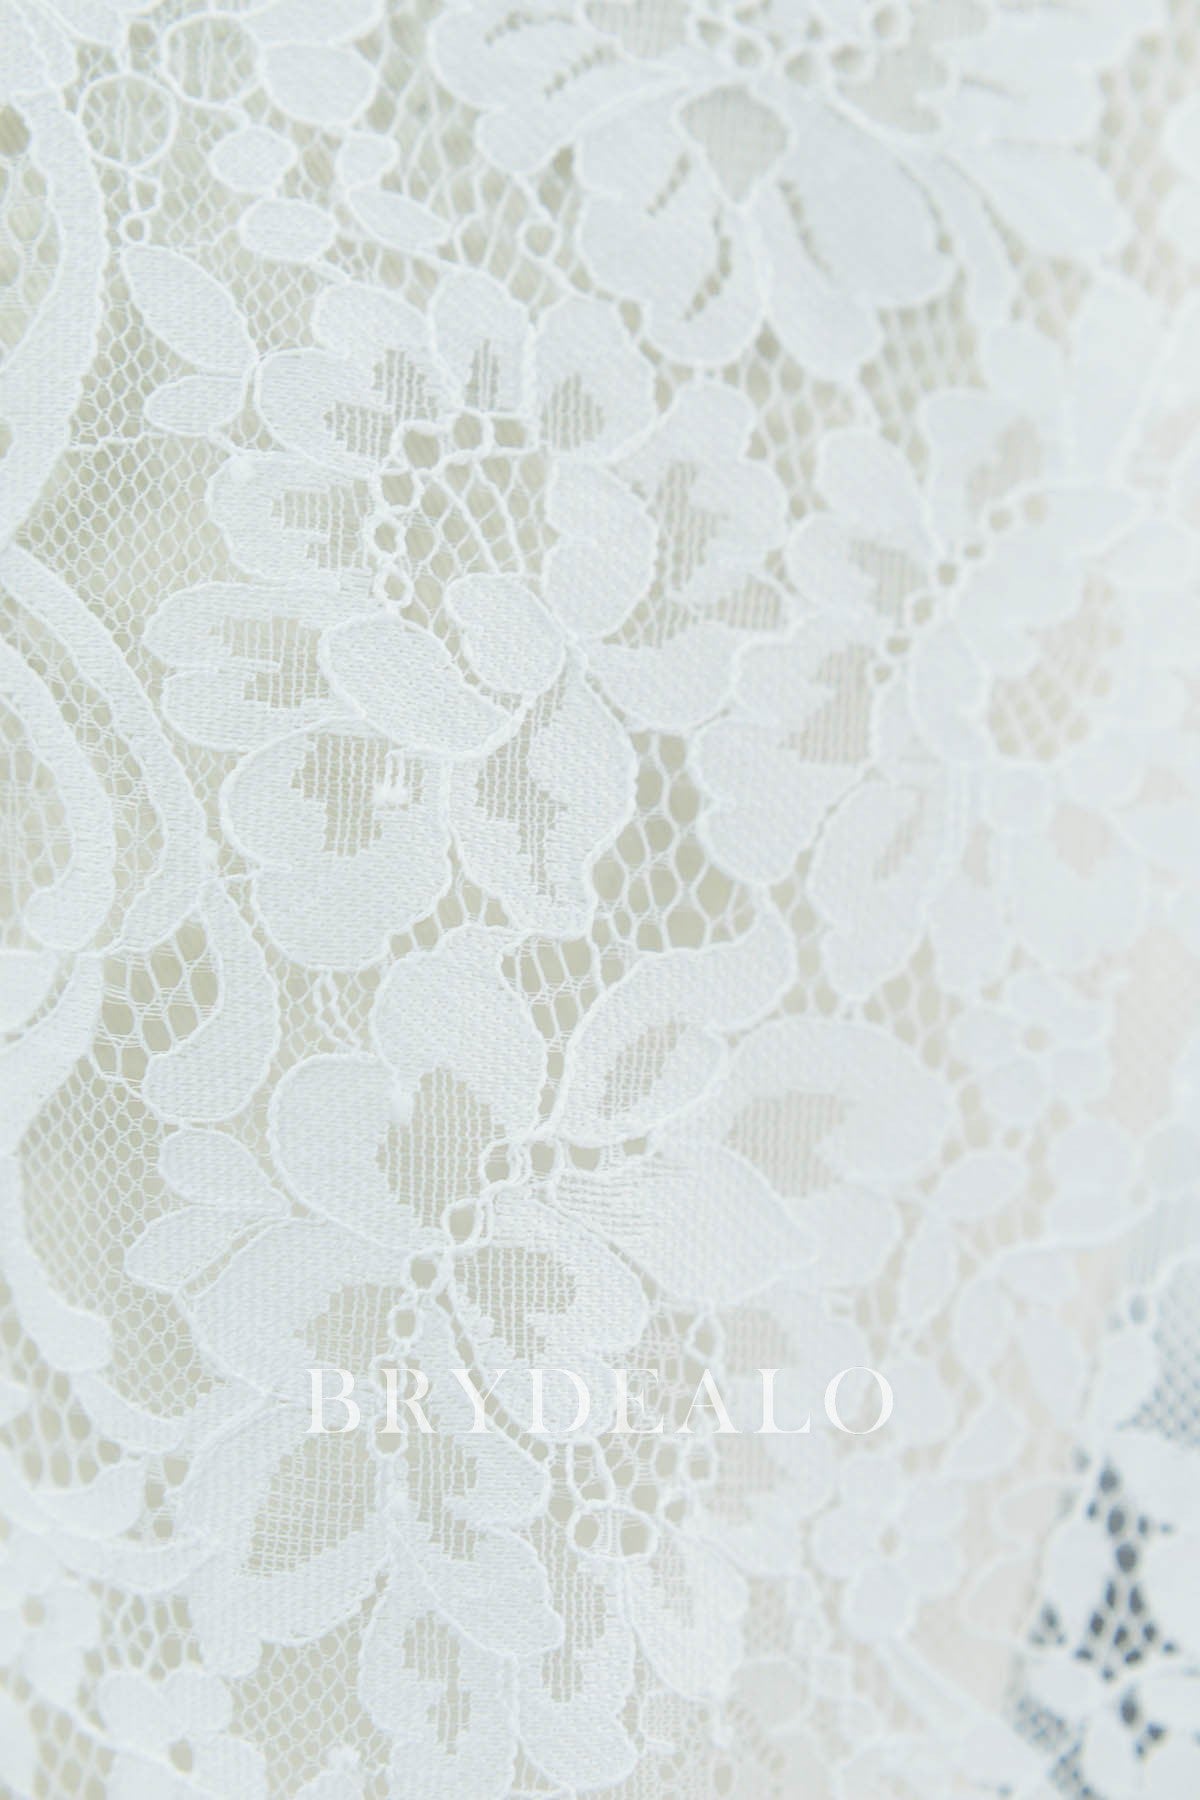 Gridding Motif Corded Scallop Lace Fabric